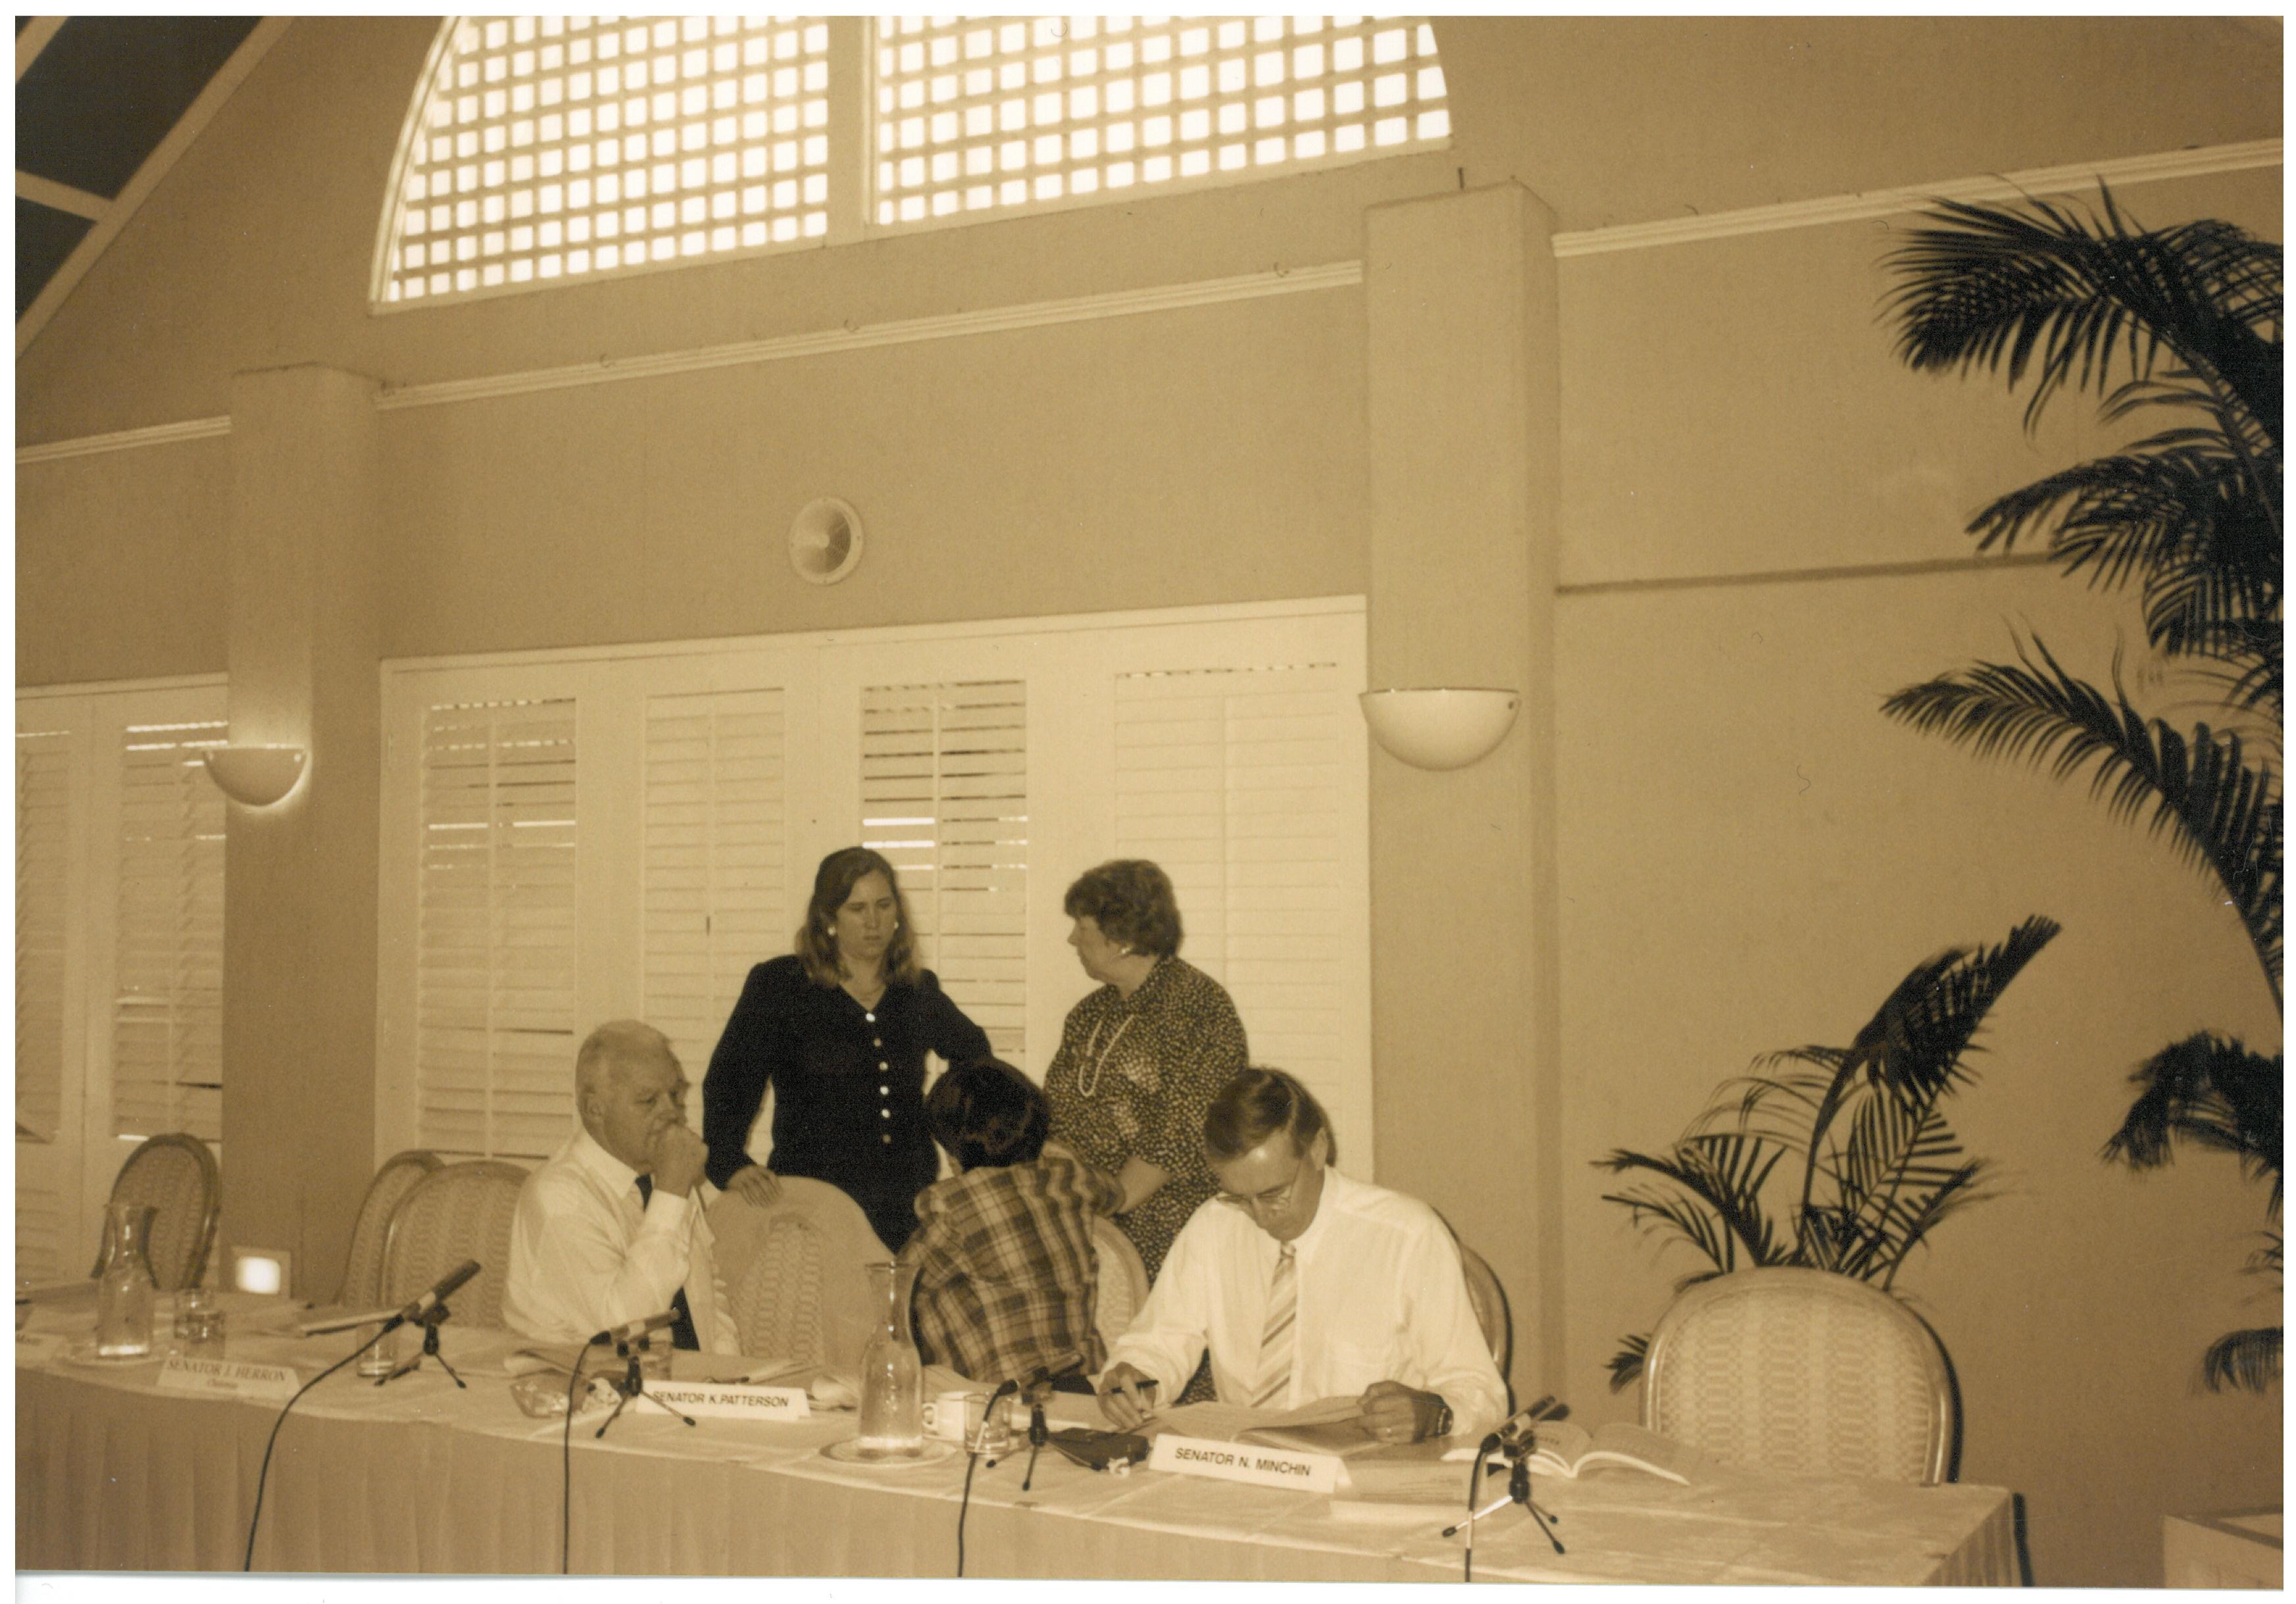 Community Affairs References Committee during a public hearing of its inquiry into tobacco and the costs of tobacco-related illnesses at Cairns, 22 February 1995. Standing L-R: Senators Belinda Neal and Kay Denman. Seated L-R: Senators John Herron [Chair], Kay Patterson and Nick Minchin.